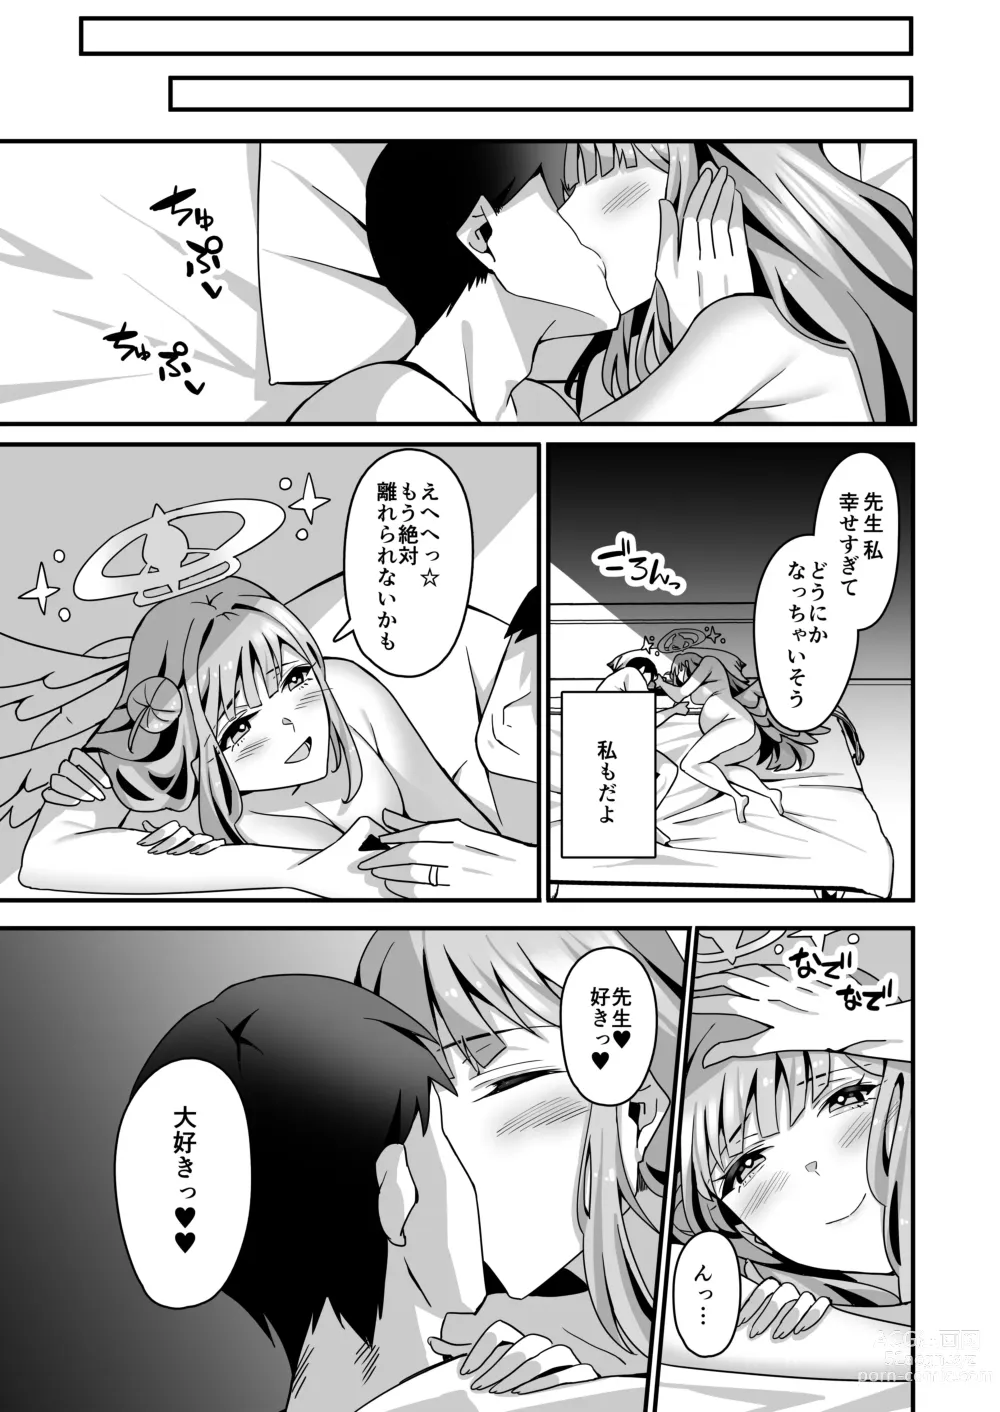 Page 32 of doujinshi Mika to Happy Love Love Sex Shite Haramaseru Hon - A book about happy loving sex with Mika and impregnation.